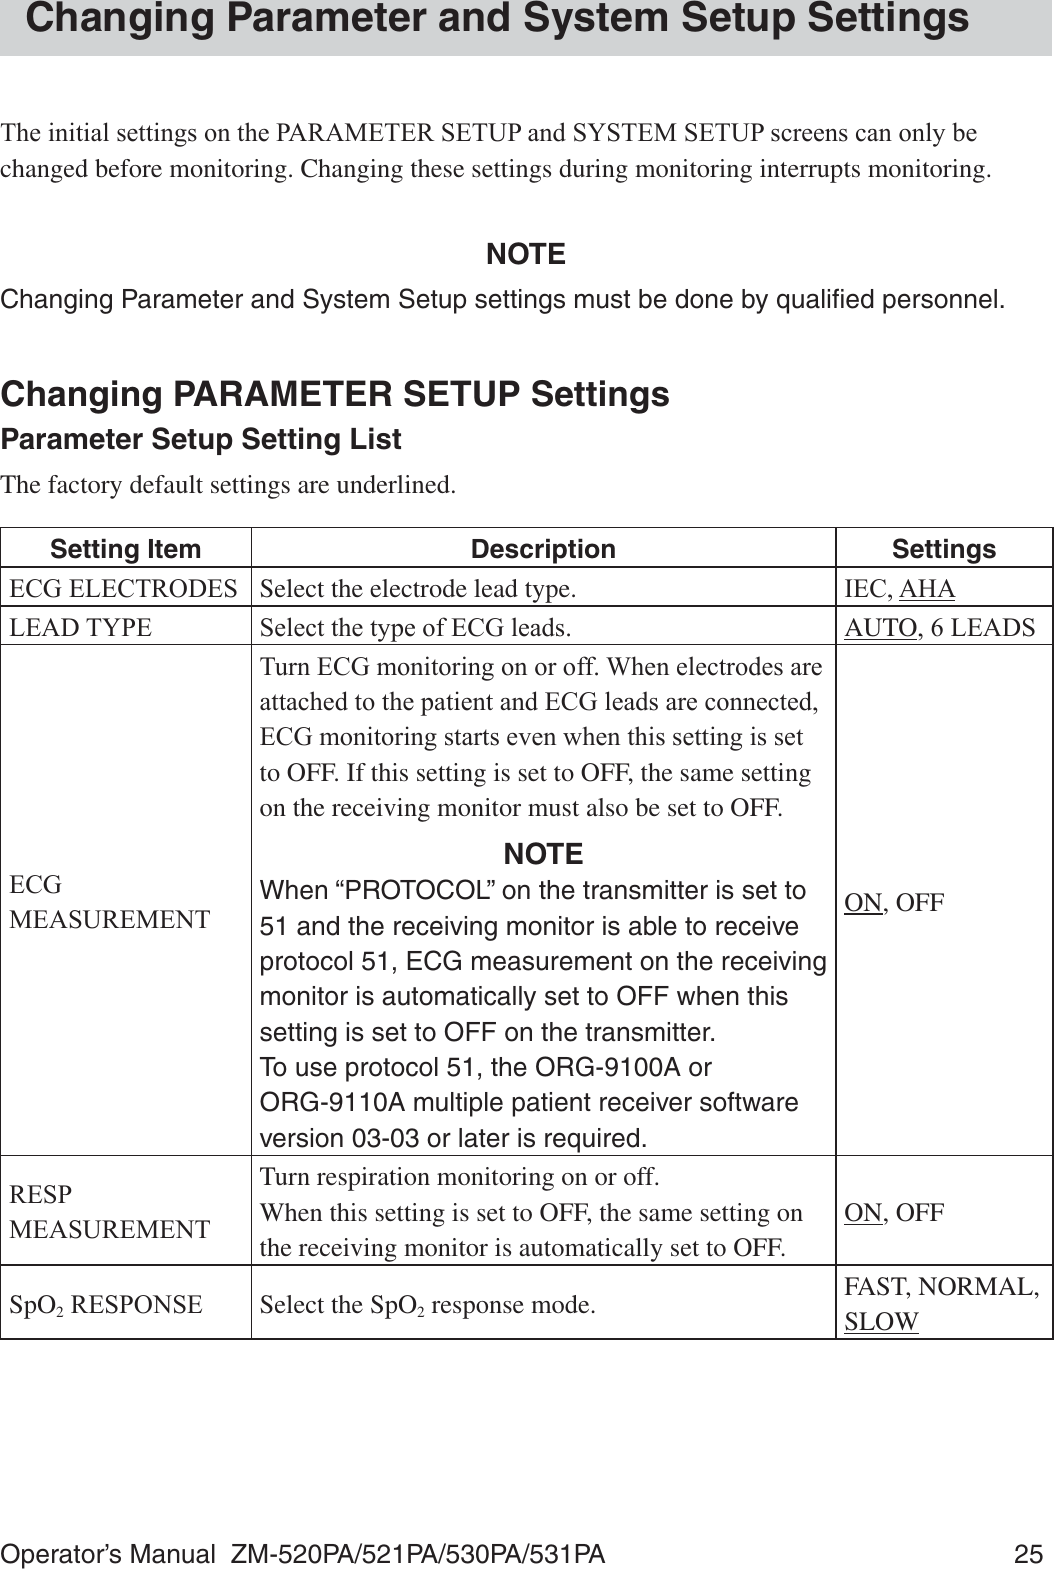 Operator’s Manual  ZM-520PA/521PA/530PA/531PA  25Changing Parameter and System Setup Settings7KHLQLWLDOVHWWLQJVRQWKH3$5$0(7(56(783DQG6&lt;67(06(783VFUHHQVFDQRQO\EHchanged before monitoring. Changing these settings during monitoring interrupts monitoring.NOTEChanging Parameter and System Setup settings must be done by qualiﬁed personnel.Changing PARAMETER SETUP SettingsParameter Setup Setting ListThe factory default settings are underlined.Setting Item Description Settings(&amp;*(/(&amp;752&apos;(6 Select the electrode lead type. ,(&amp;$+$/($&apos;7&lt;3( 6HOHFWWKHW\SHRI(&amp;*OHDGV AUTO/($&apos;6(&amp;*0($685(0(177XUQ(&amp;*PRQLWRULQJRQRURII:KHQHOHFWURGHVDUHDWWDFKHGWRWKHSDWLHQWDQG(&amp;*OHDGVDUHFRQQHFWHG(&amp;*PRQLWRULQJVWDUWVHYHQZKHQWKLVVHWWLQJLVVHWto OFF. If this setting is set to OFF, the same setting on the receiving monitor must also be set to OFF.NOTEWhen “PROTOCOL” on the transmitter is set to 51 and the receiving monitor is able to receive protocol 51, ECG measurement on the receiving monitor is automatically set to OFF when this setting is set to OFF on the transmitter. To use protocol 51, the ORG-9100A or  ORG-9110A multiple patient receiver software version 03-03 or later is required.ON, OFF5(630($685(0(17Turn respiration monitoring on or off.When this setting is set to OFF, the same setting on the receiving monitor is automatically set to OFF.ON, OFFSpO25(63216( Select the SpO2 response mode. FAST, NORMAL, SLOW